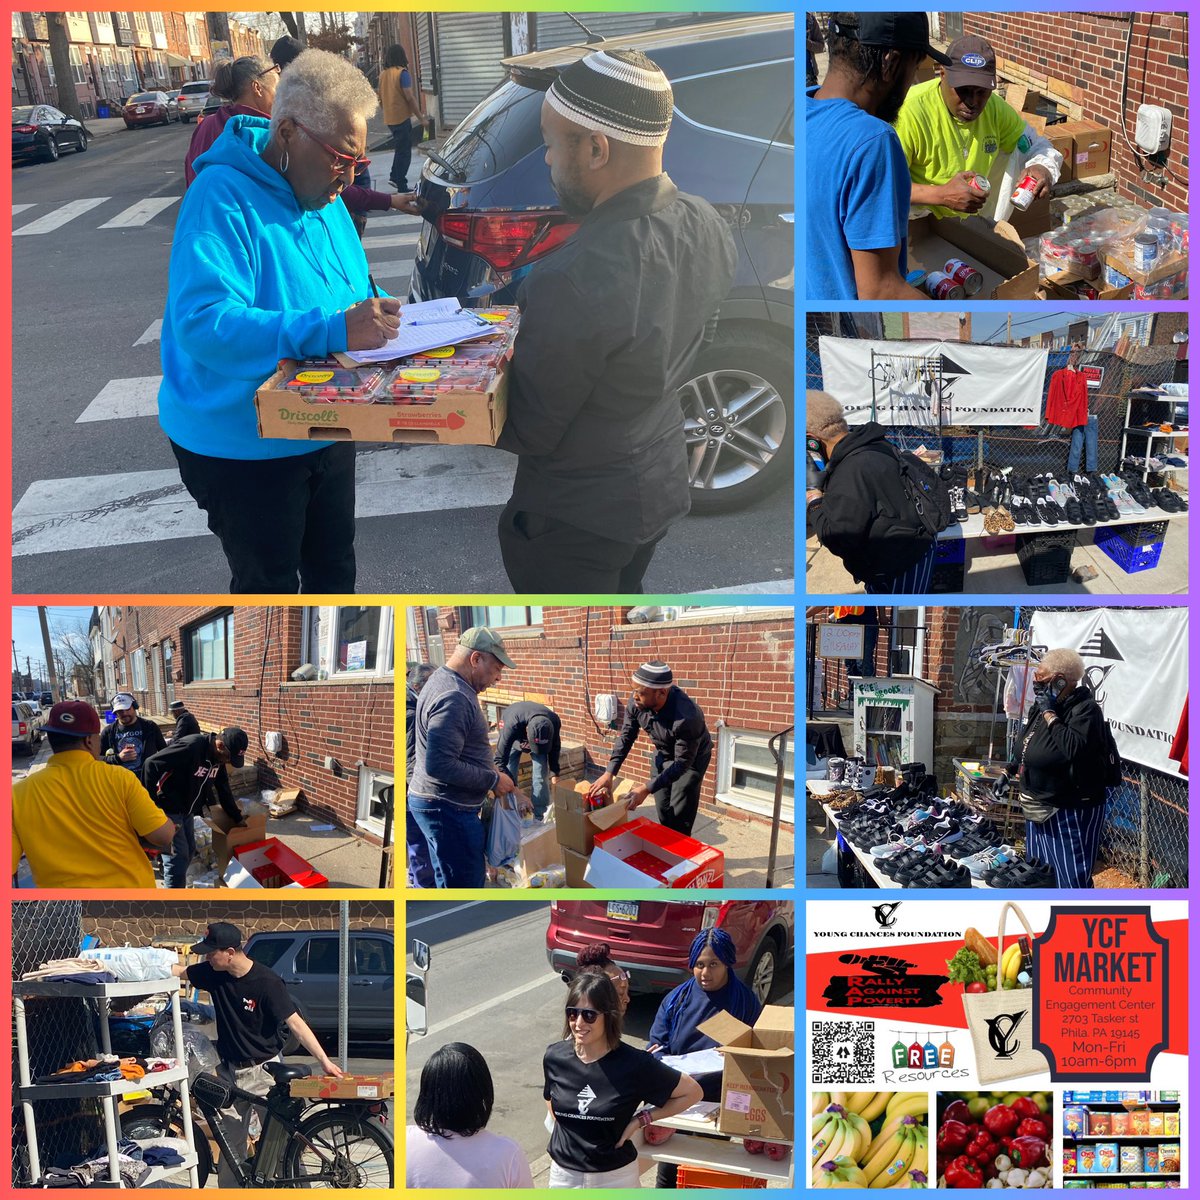 WE HAD A GREAT DAY WITH OUR COMMUNITY PARTNERS & FRIENDS GIVING OUT FOOD,ESSENTIAL RESOURCES,& COLLECTING COMMUNITY SURVEYS TO FAMILIES IN GRAYS FEERY. #youkeepwhatyouhavebygivingitaway #ycfbettertogivethanrecieve #ycfseeingthebiggerpicturenow #ycfphilly